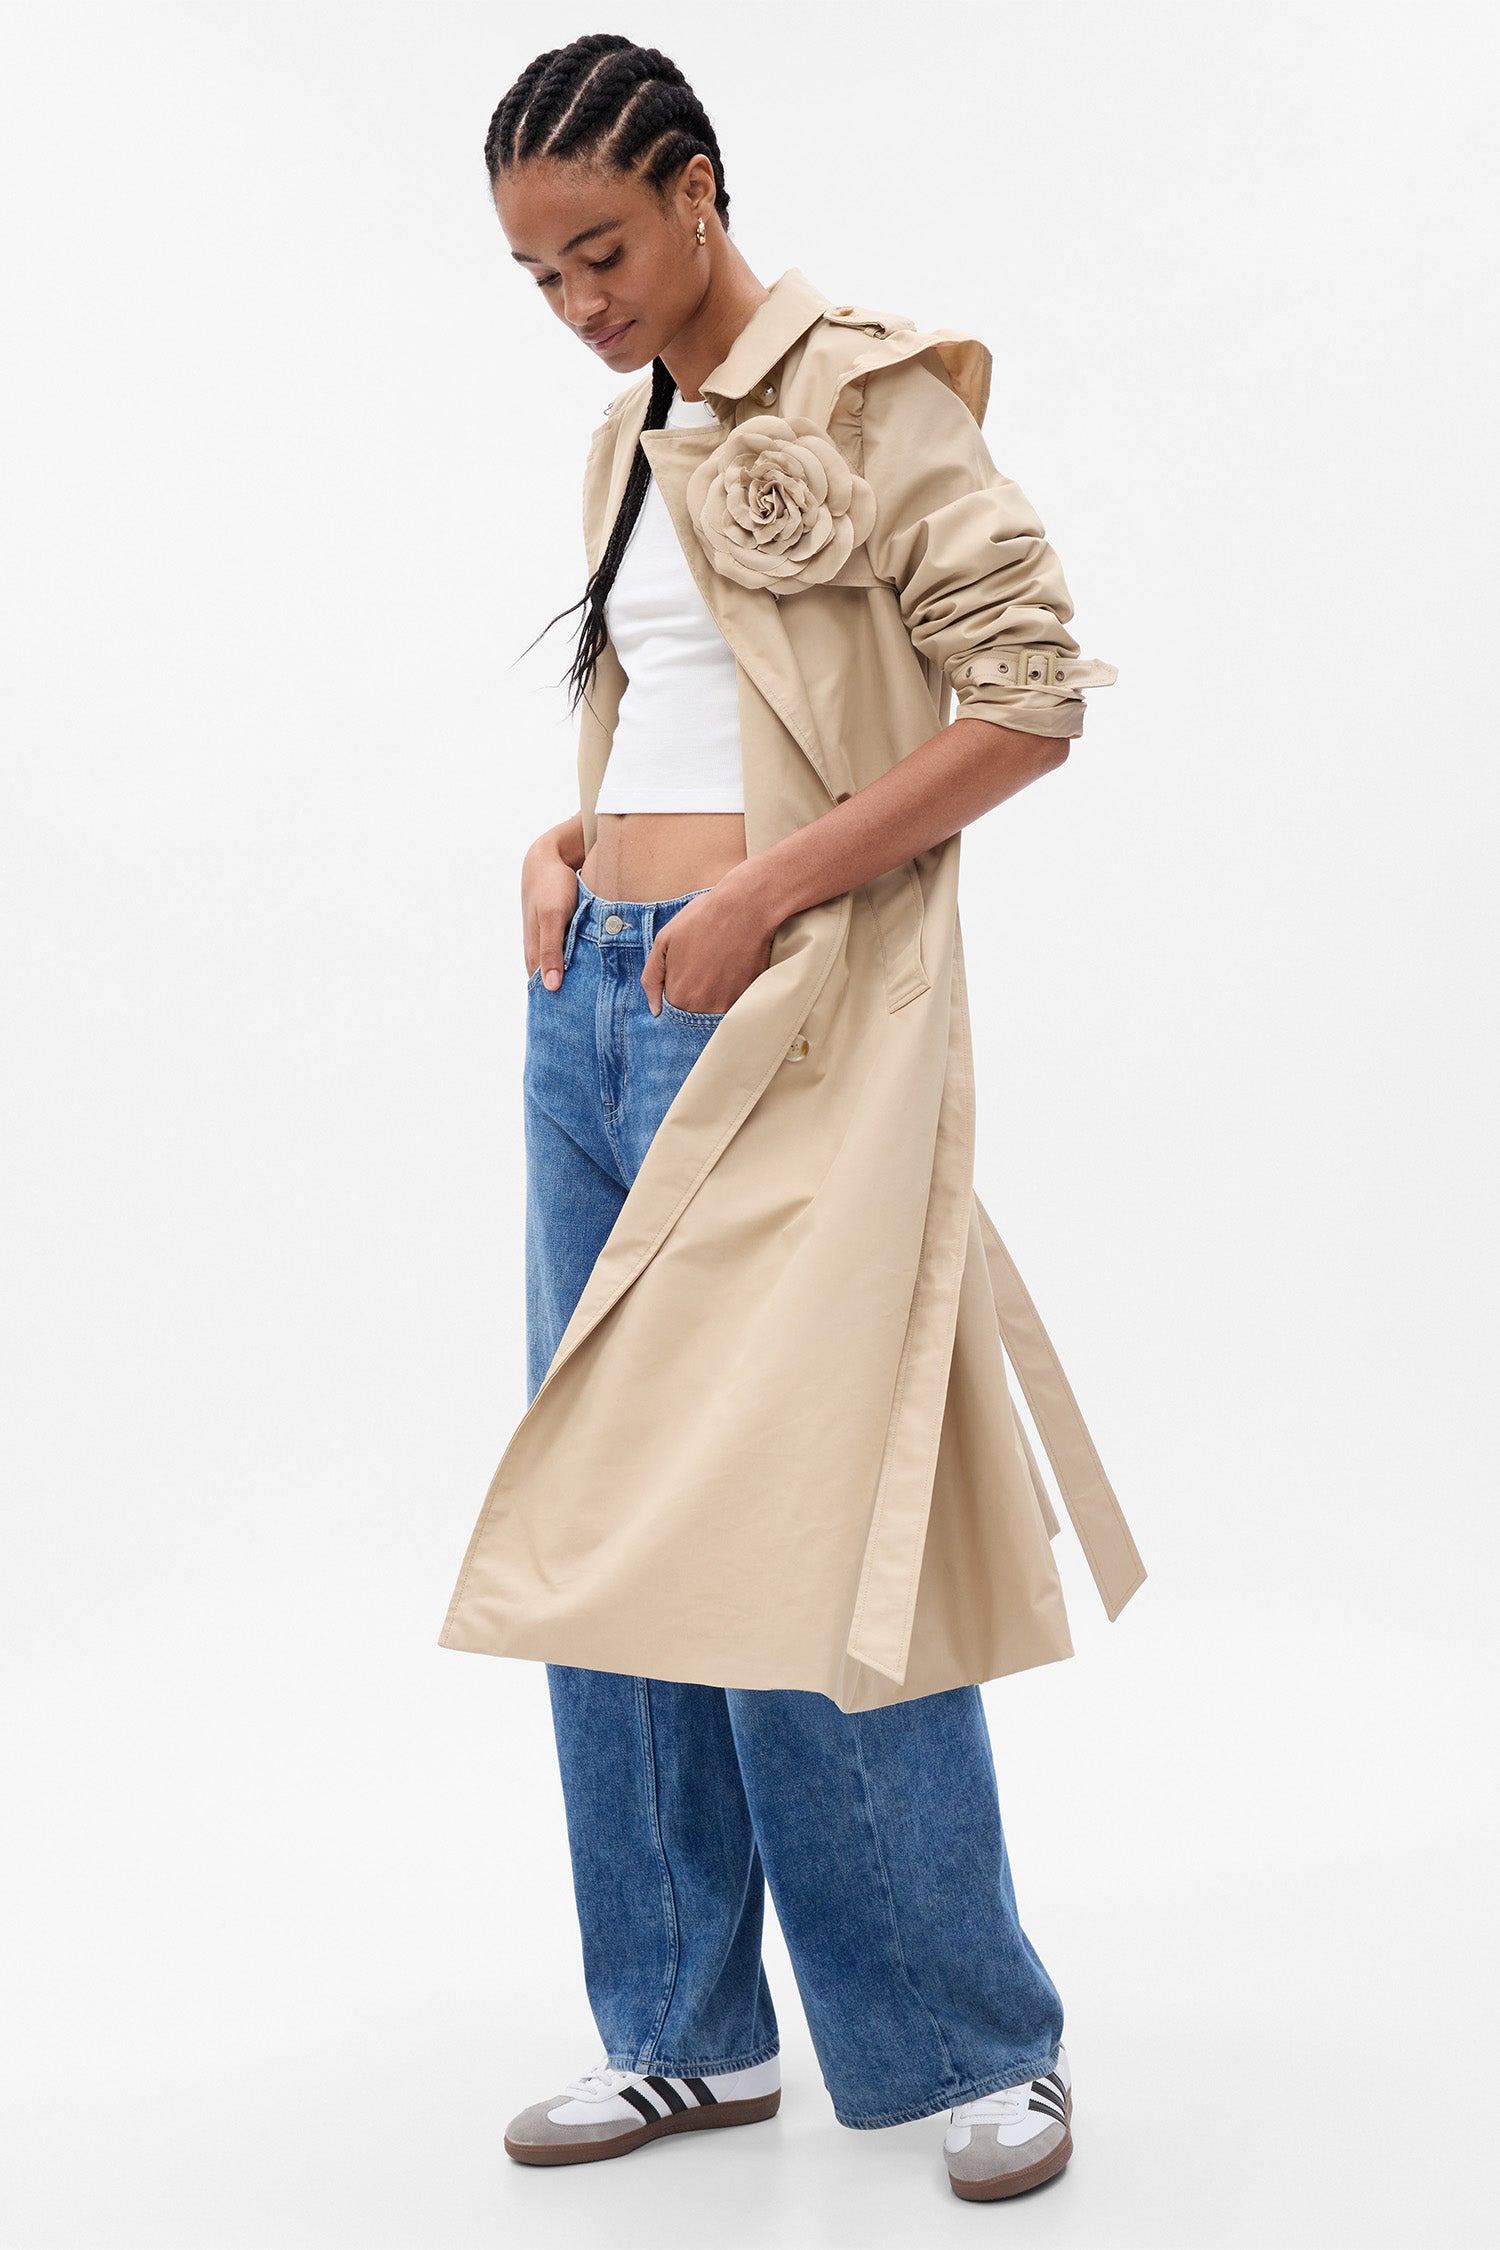 Model wearing khaki trench coat with rosette detail at chest